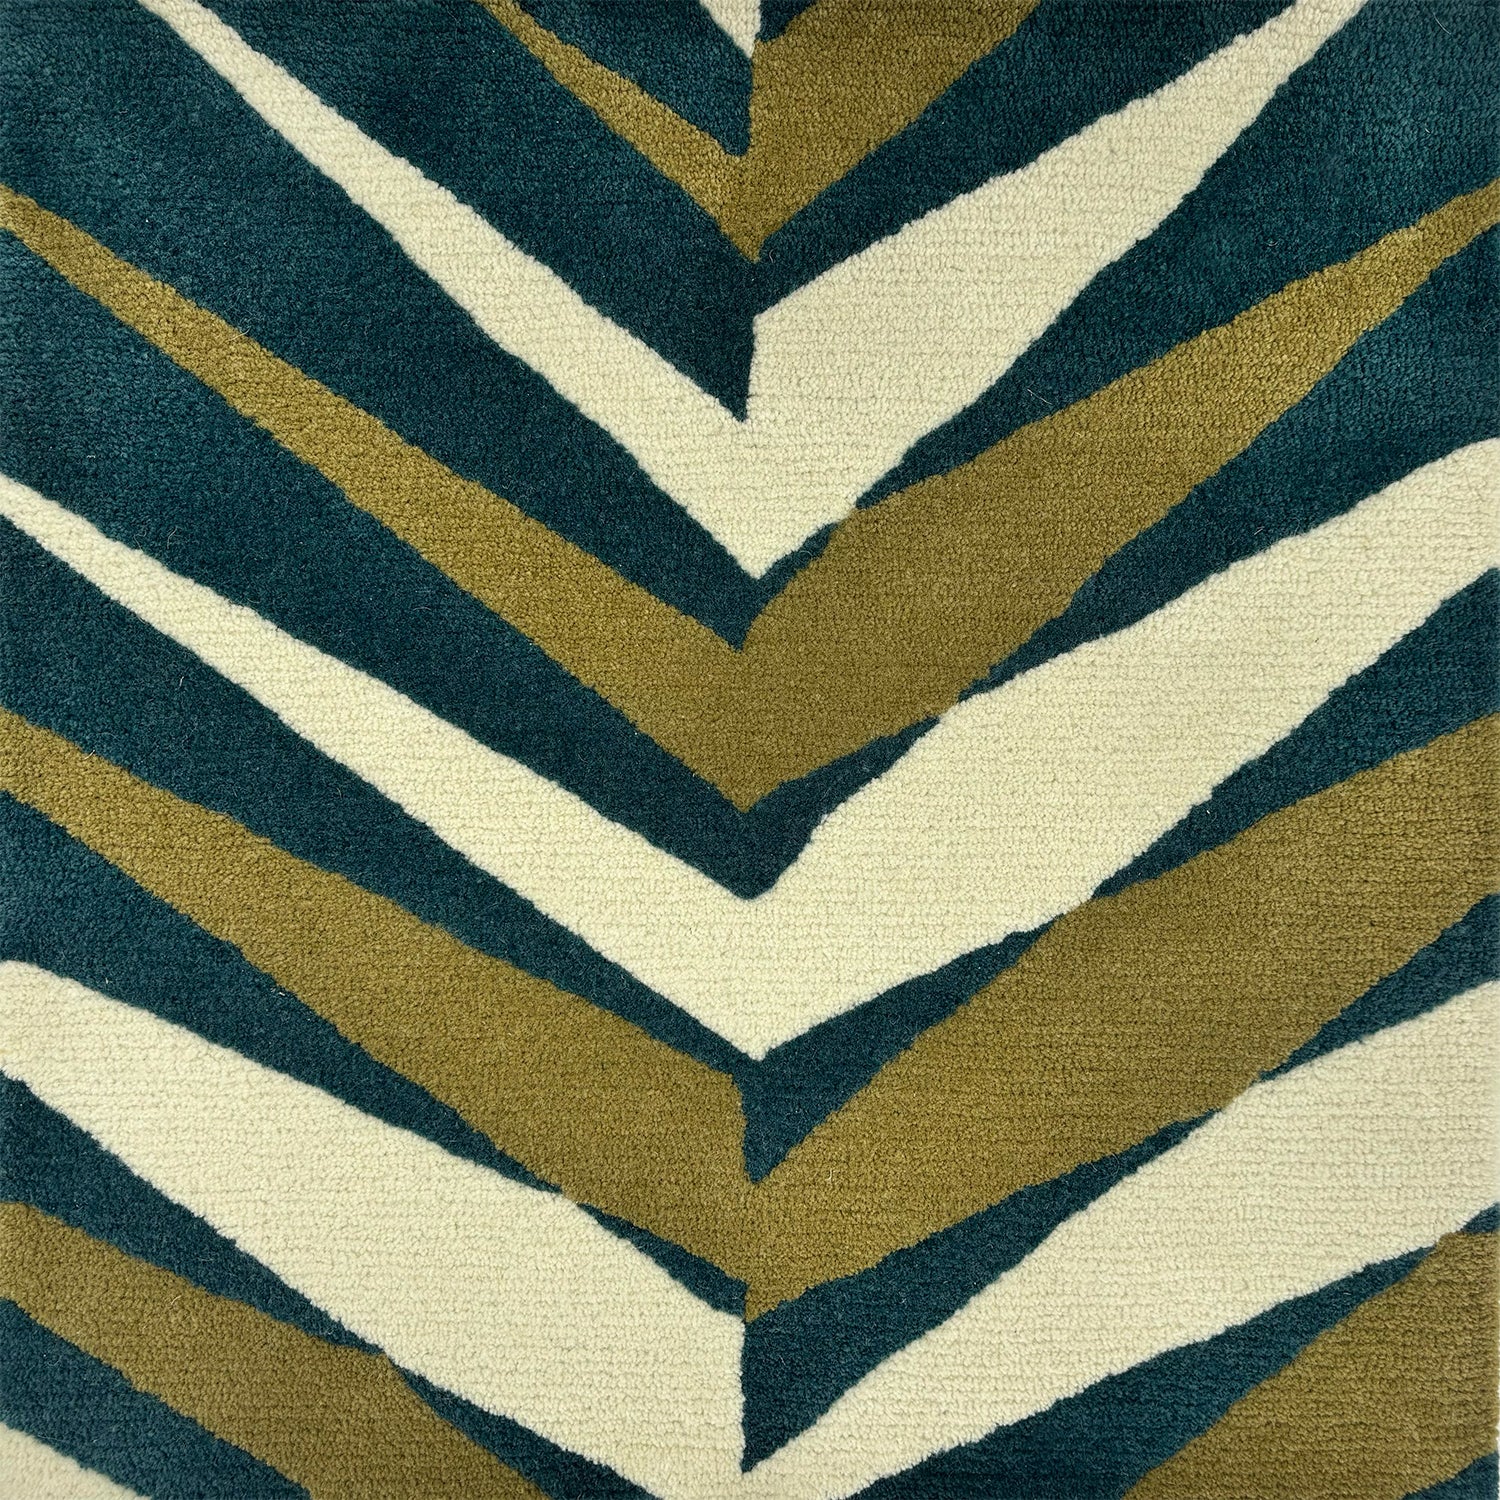 Detail of a handknotted rug in a large playful herringbone pattern in teal, cream and light green